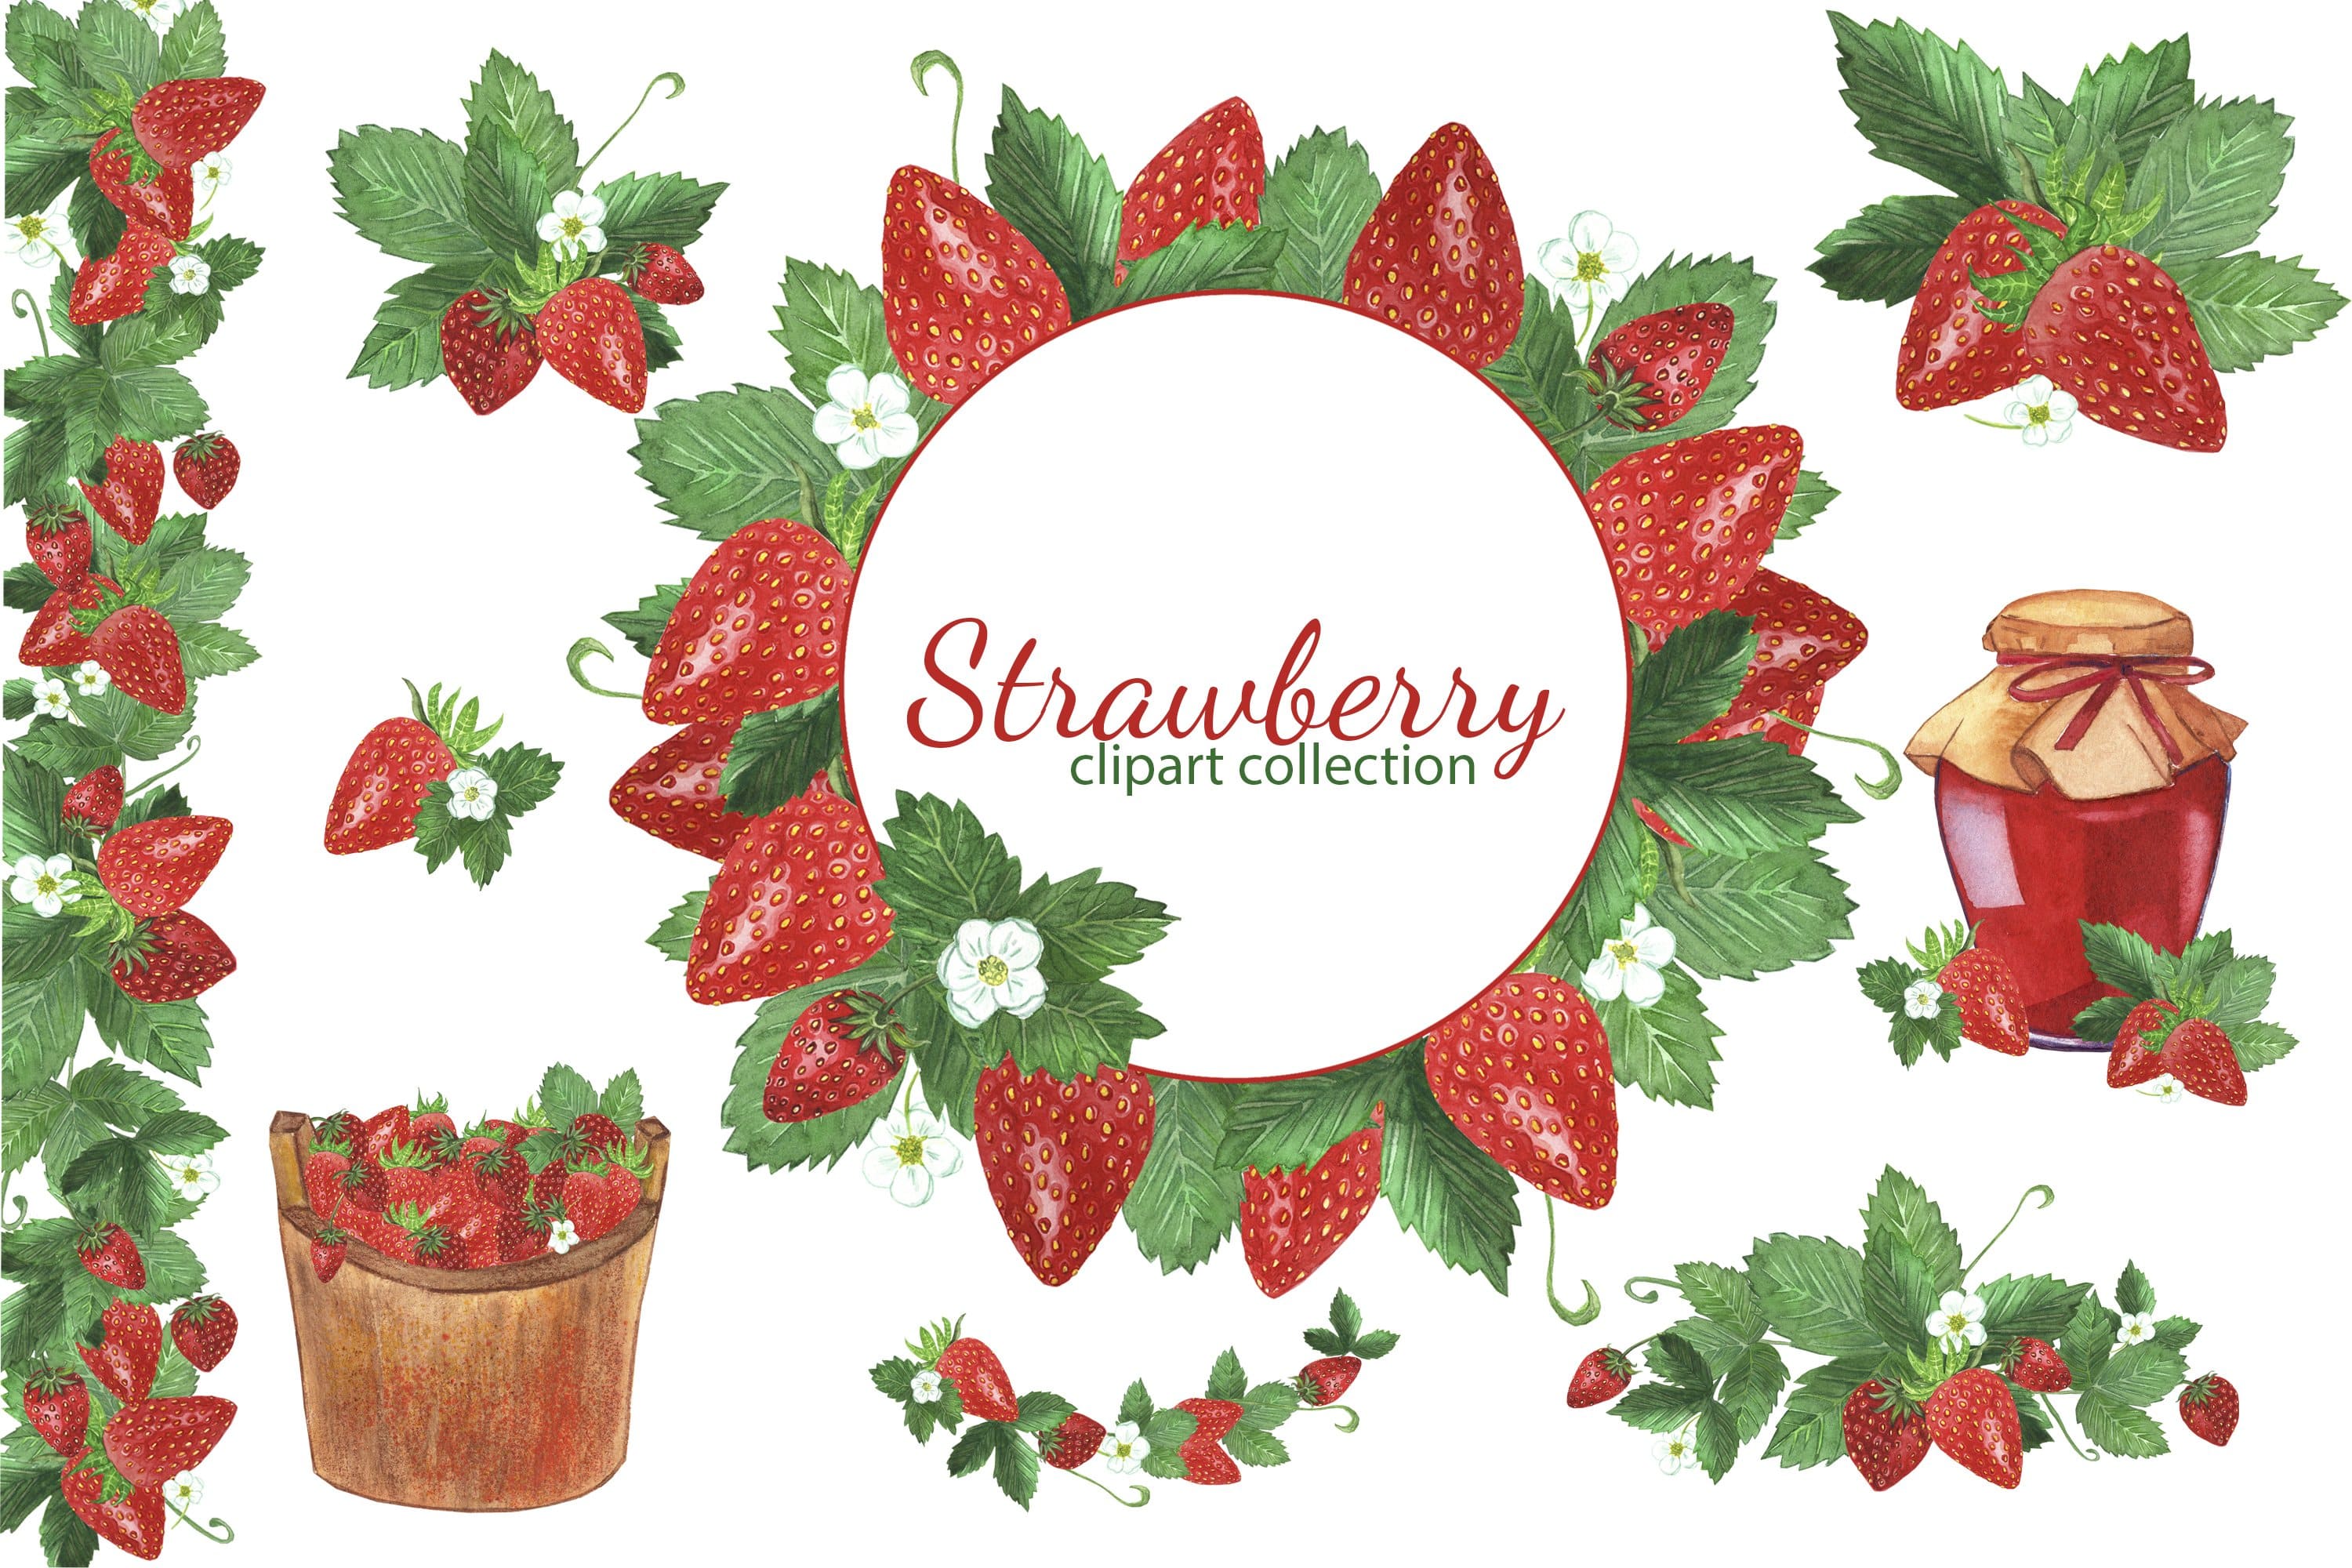 Compositions from strawberries and strawberry jam.